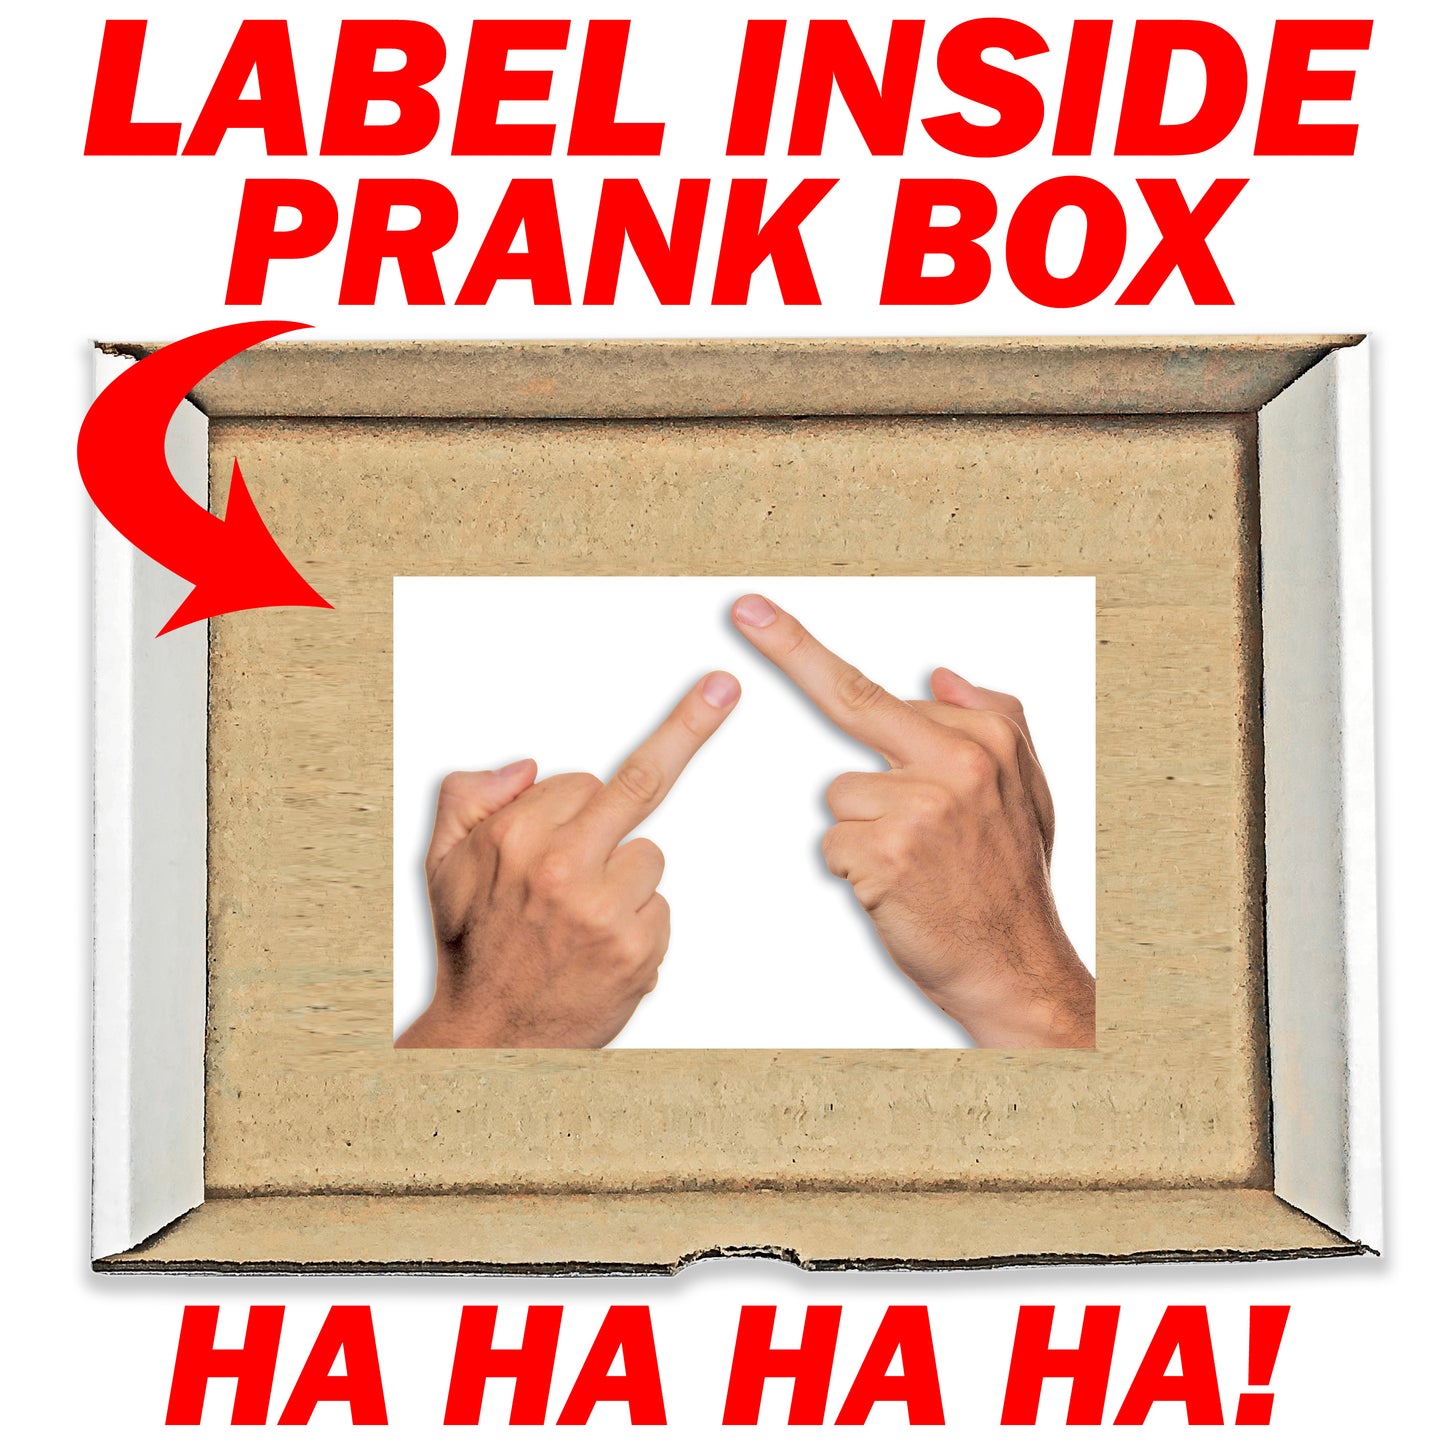 Double Middle Finger Surprise embarrassing prank box gets mailed directly to your victims 100% anonymously!